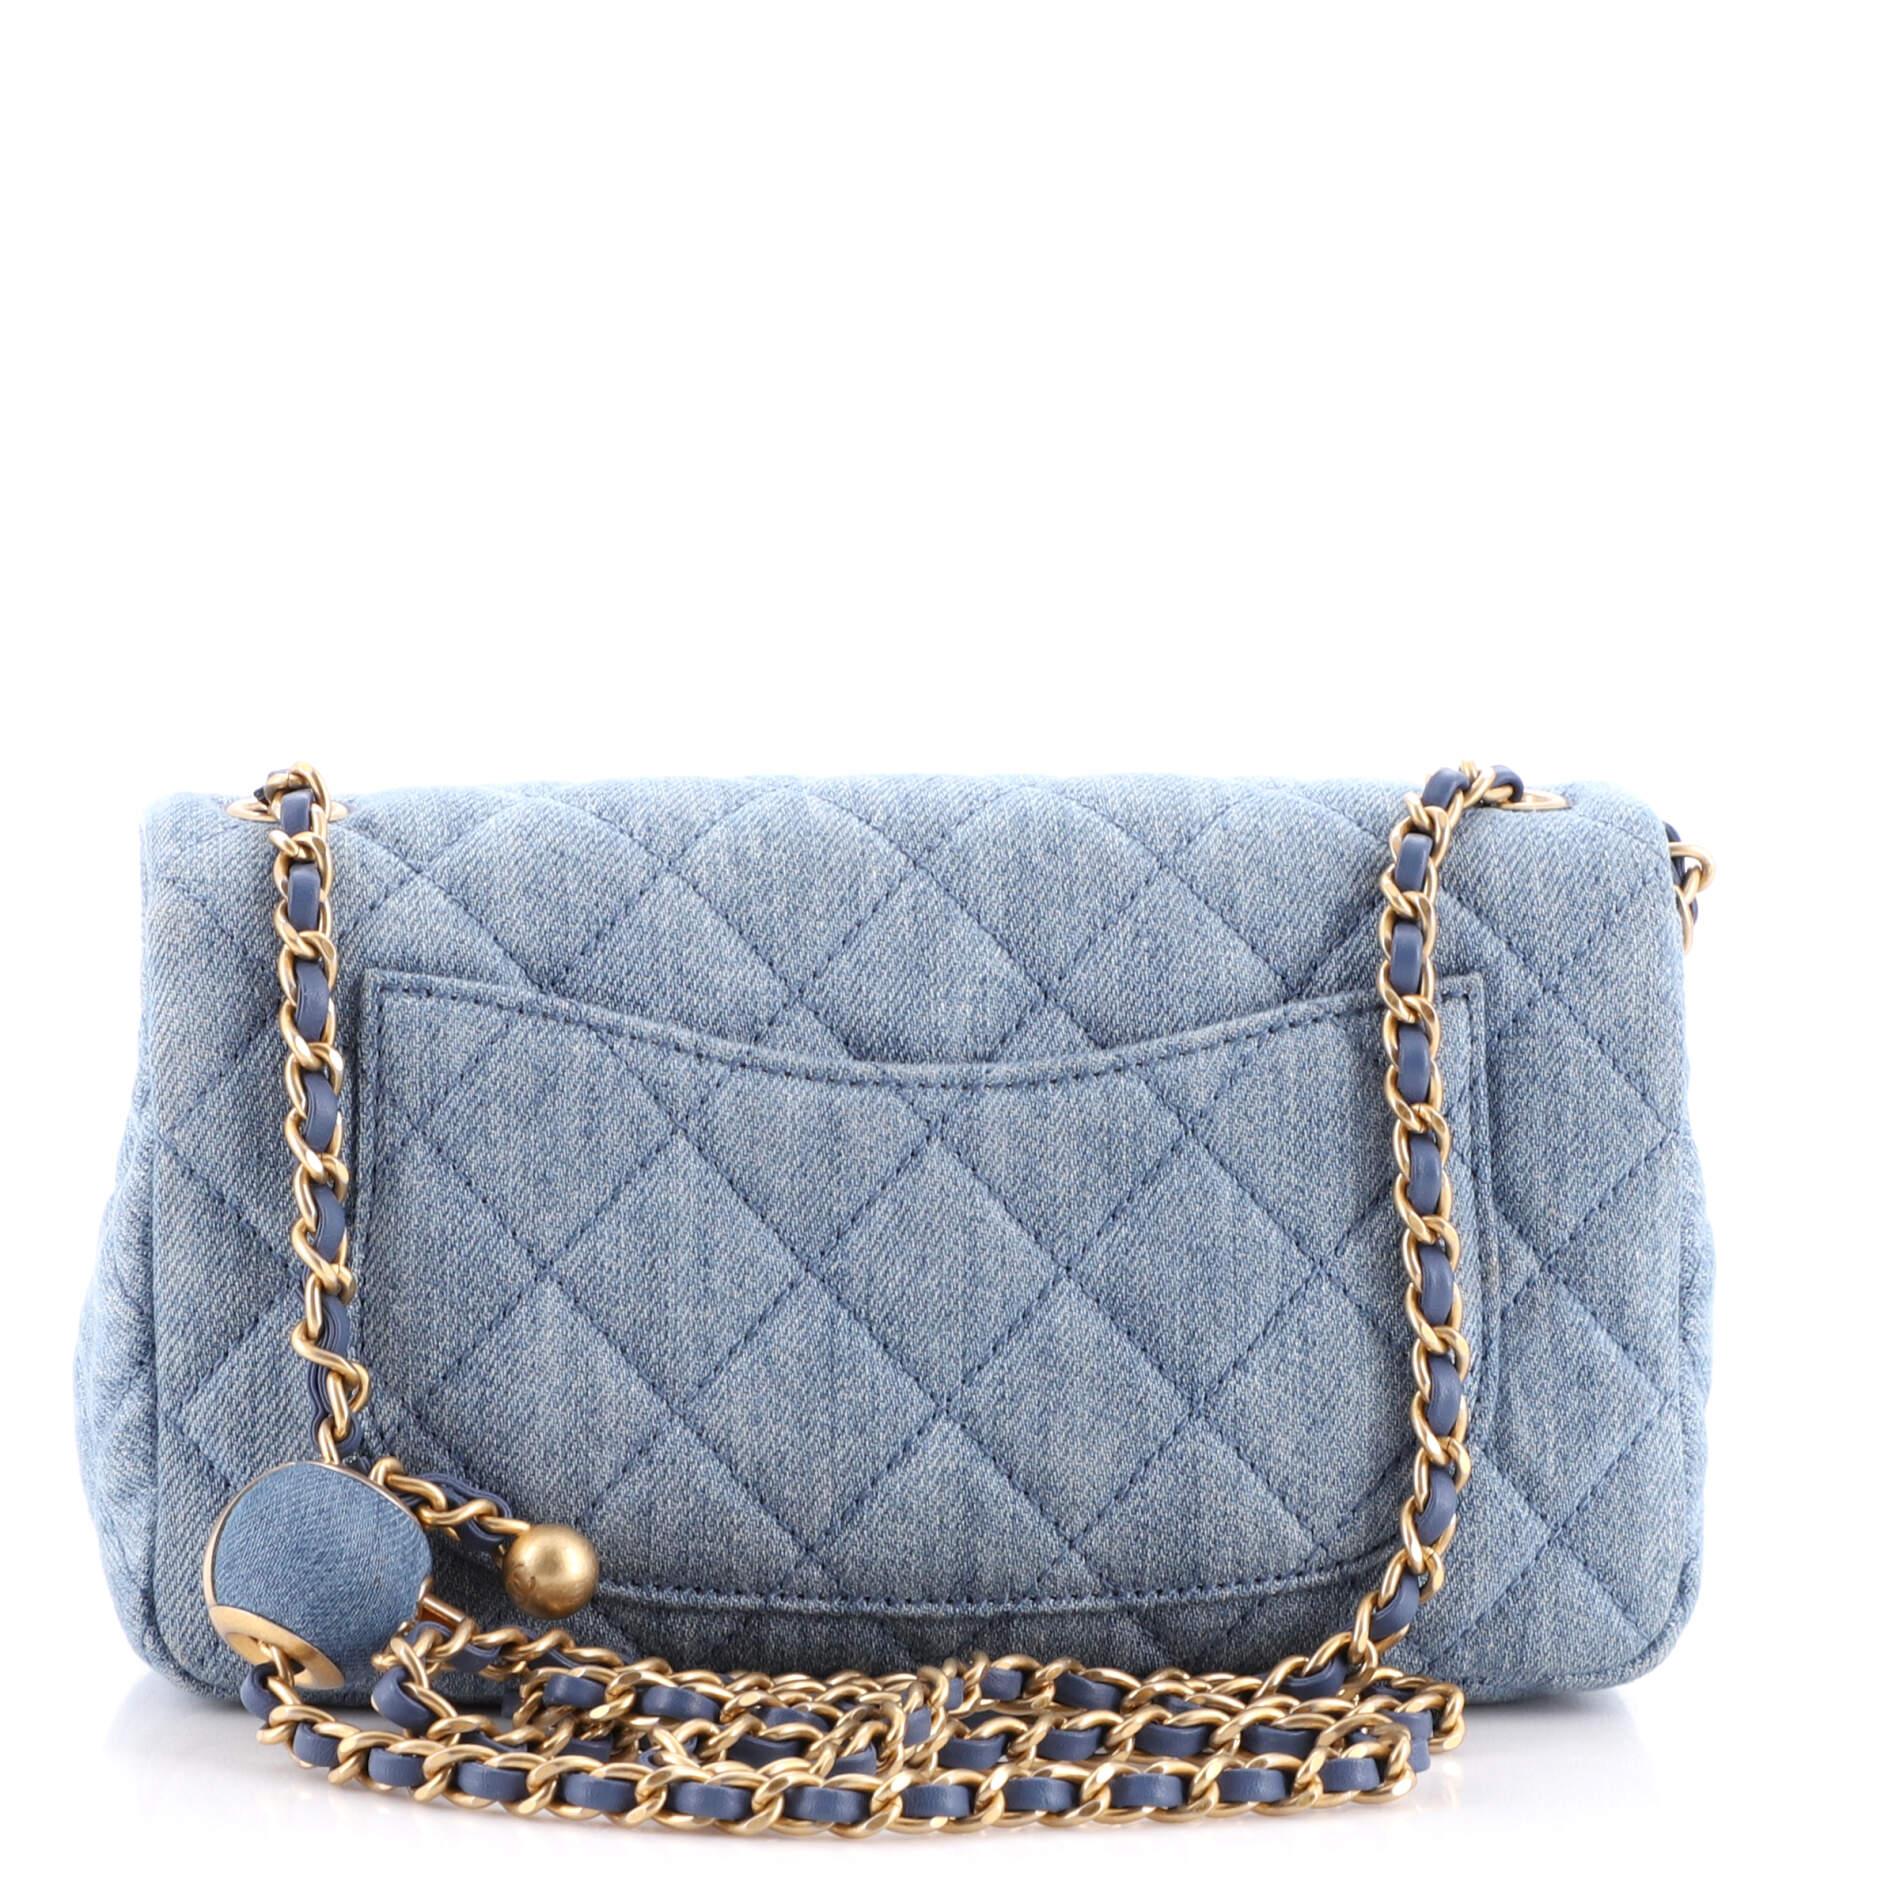 chanel jeans bag price